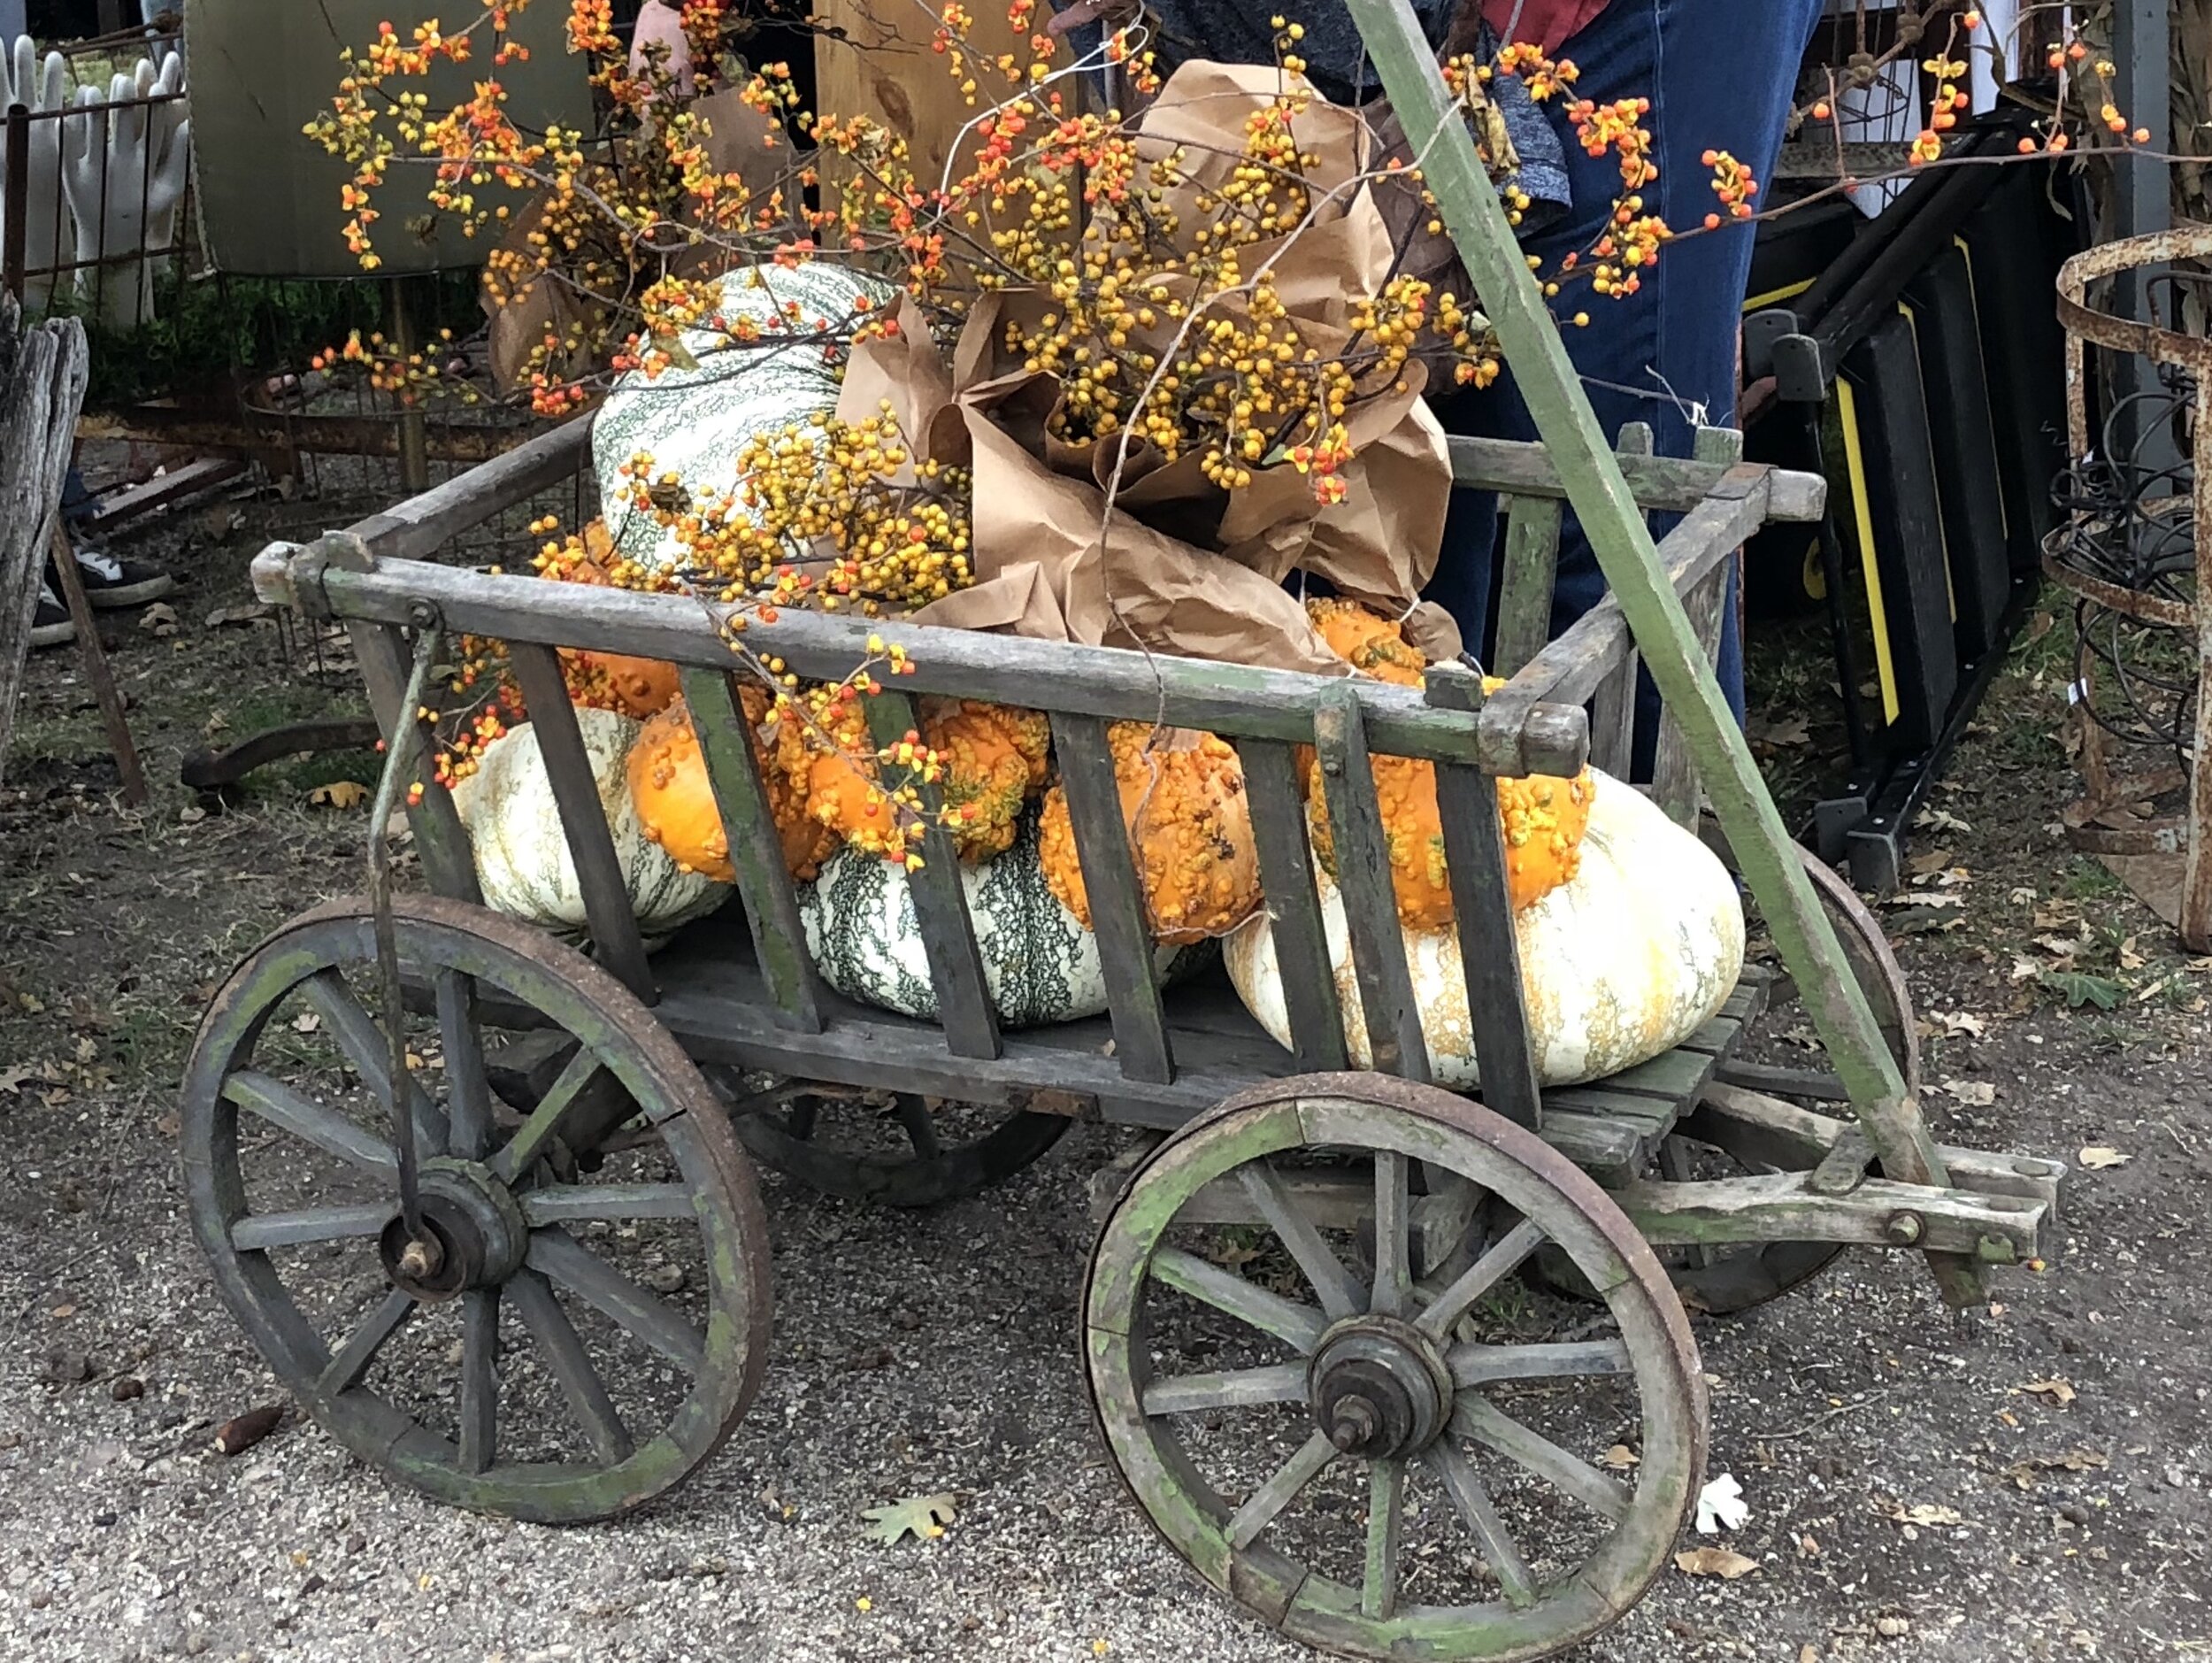 Goat Cart Filled with Pumpkins and Autumn Decor